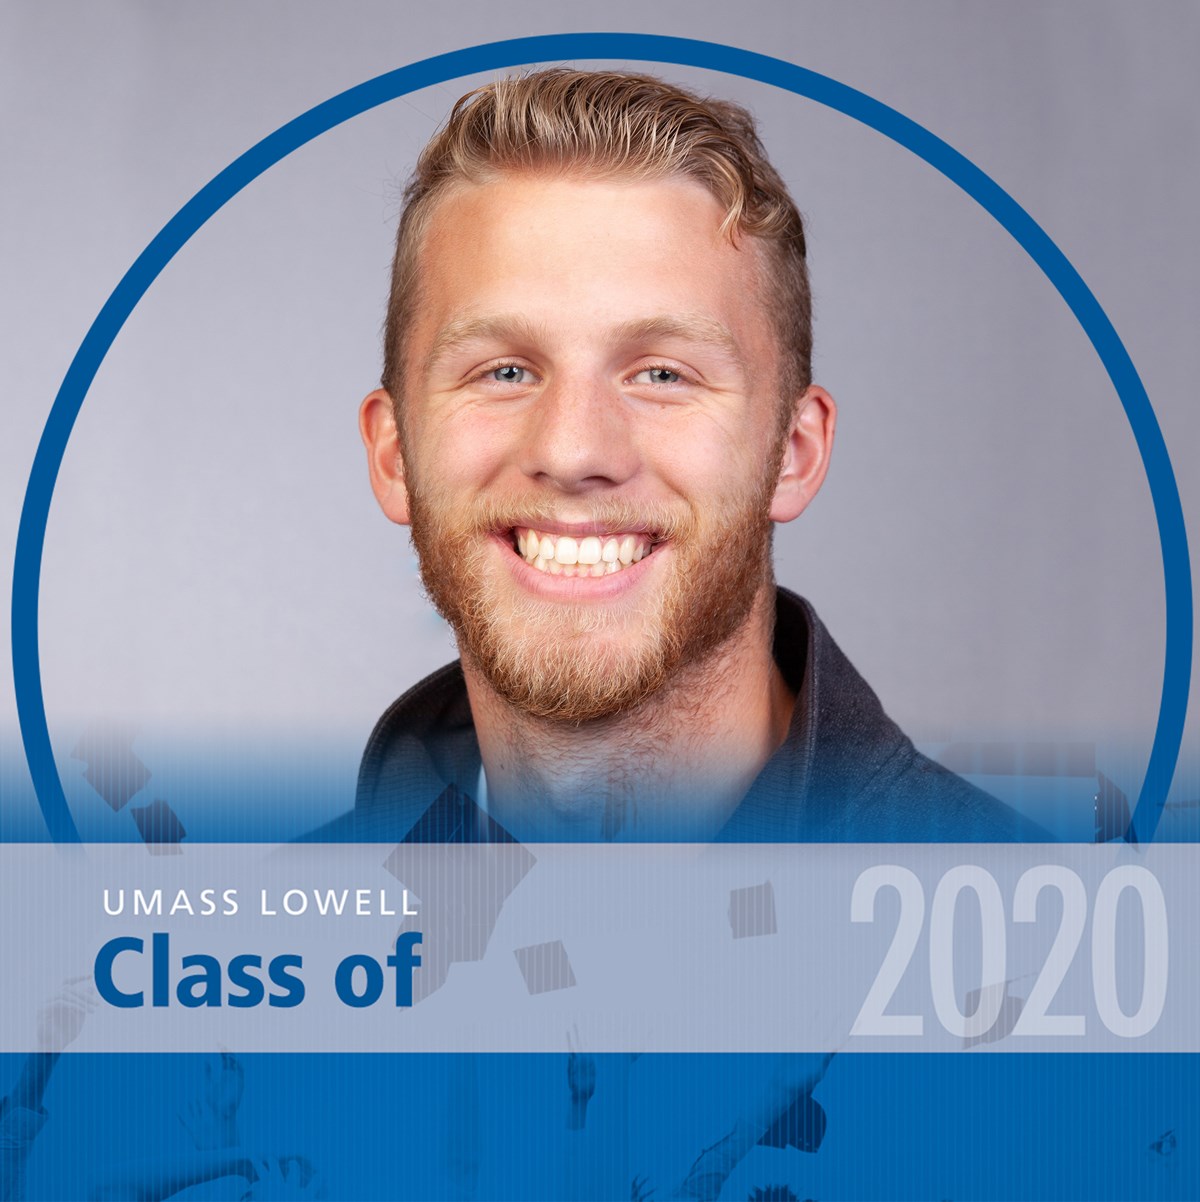 Headshot of Sam Munnelly with a blue decorative frame around it that reads "UMass Lowell Class of 2020."